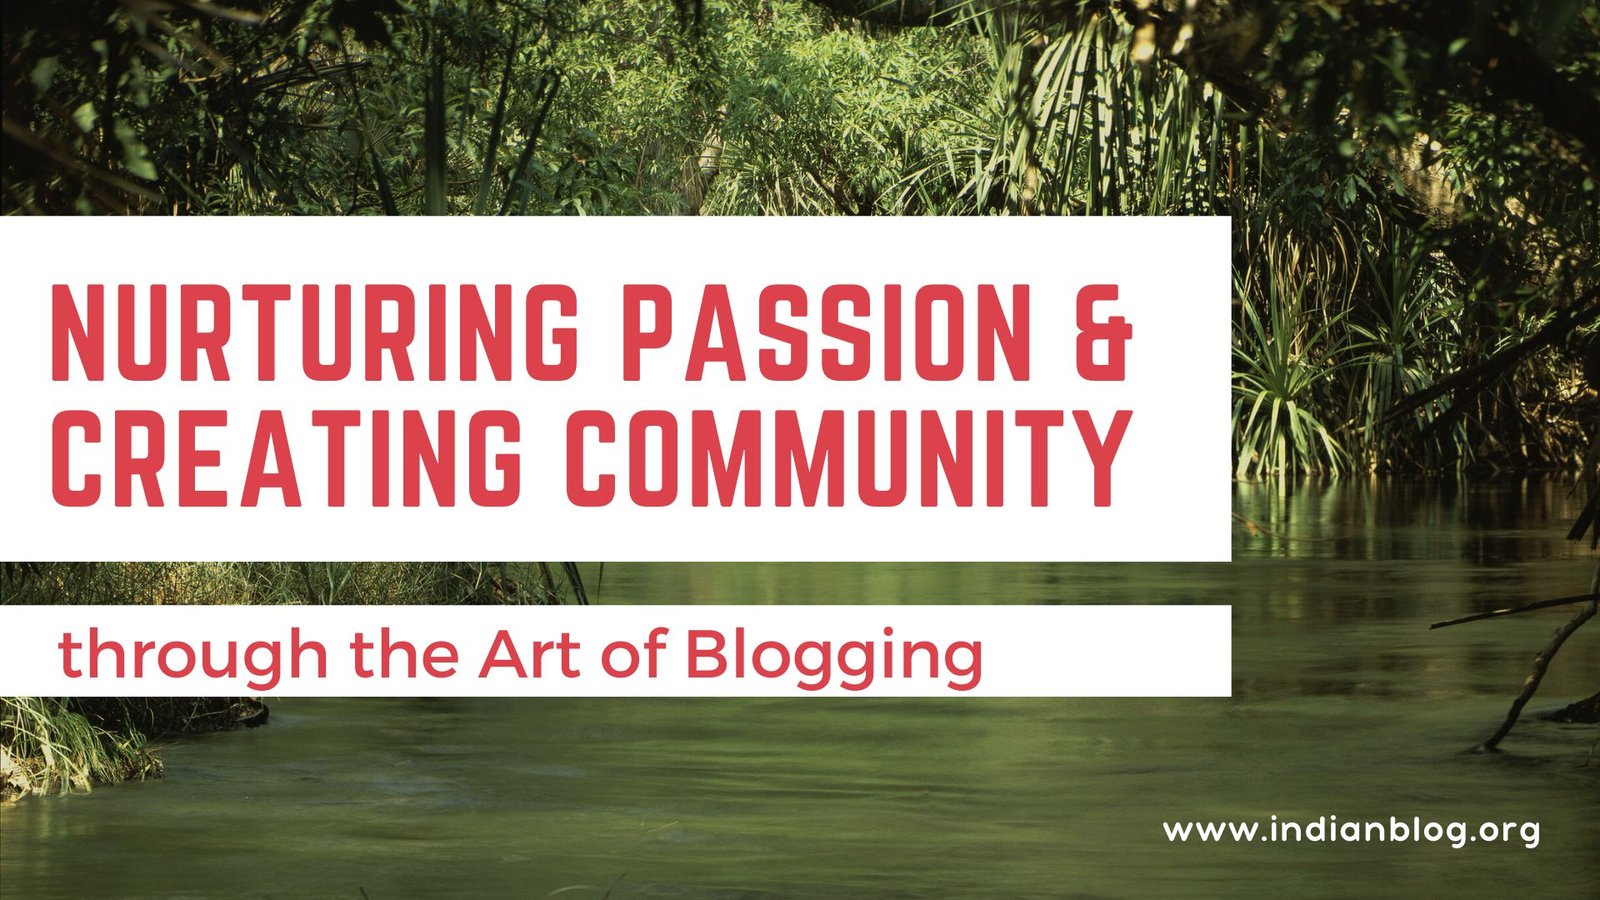 You are currently viewing Nurturing Passion & Creating Community through the Art of Blogging